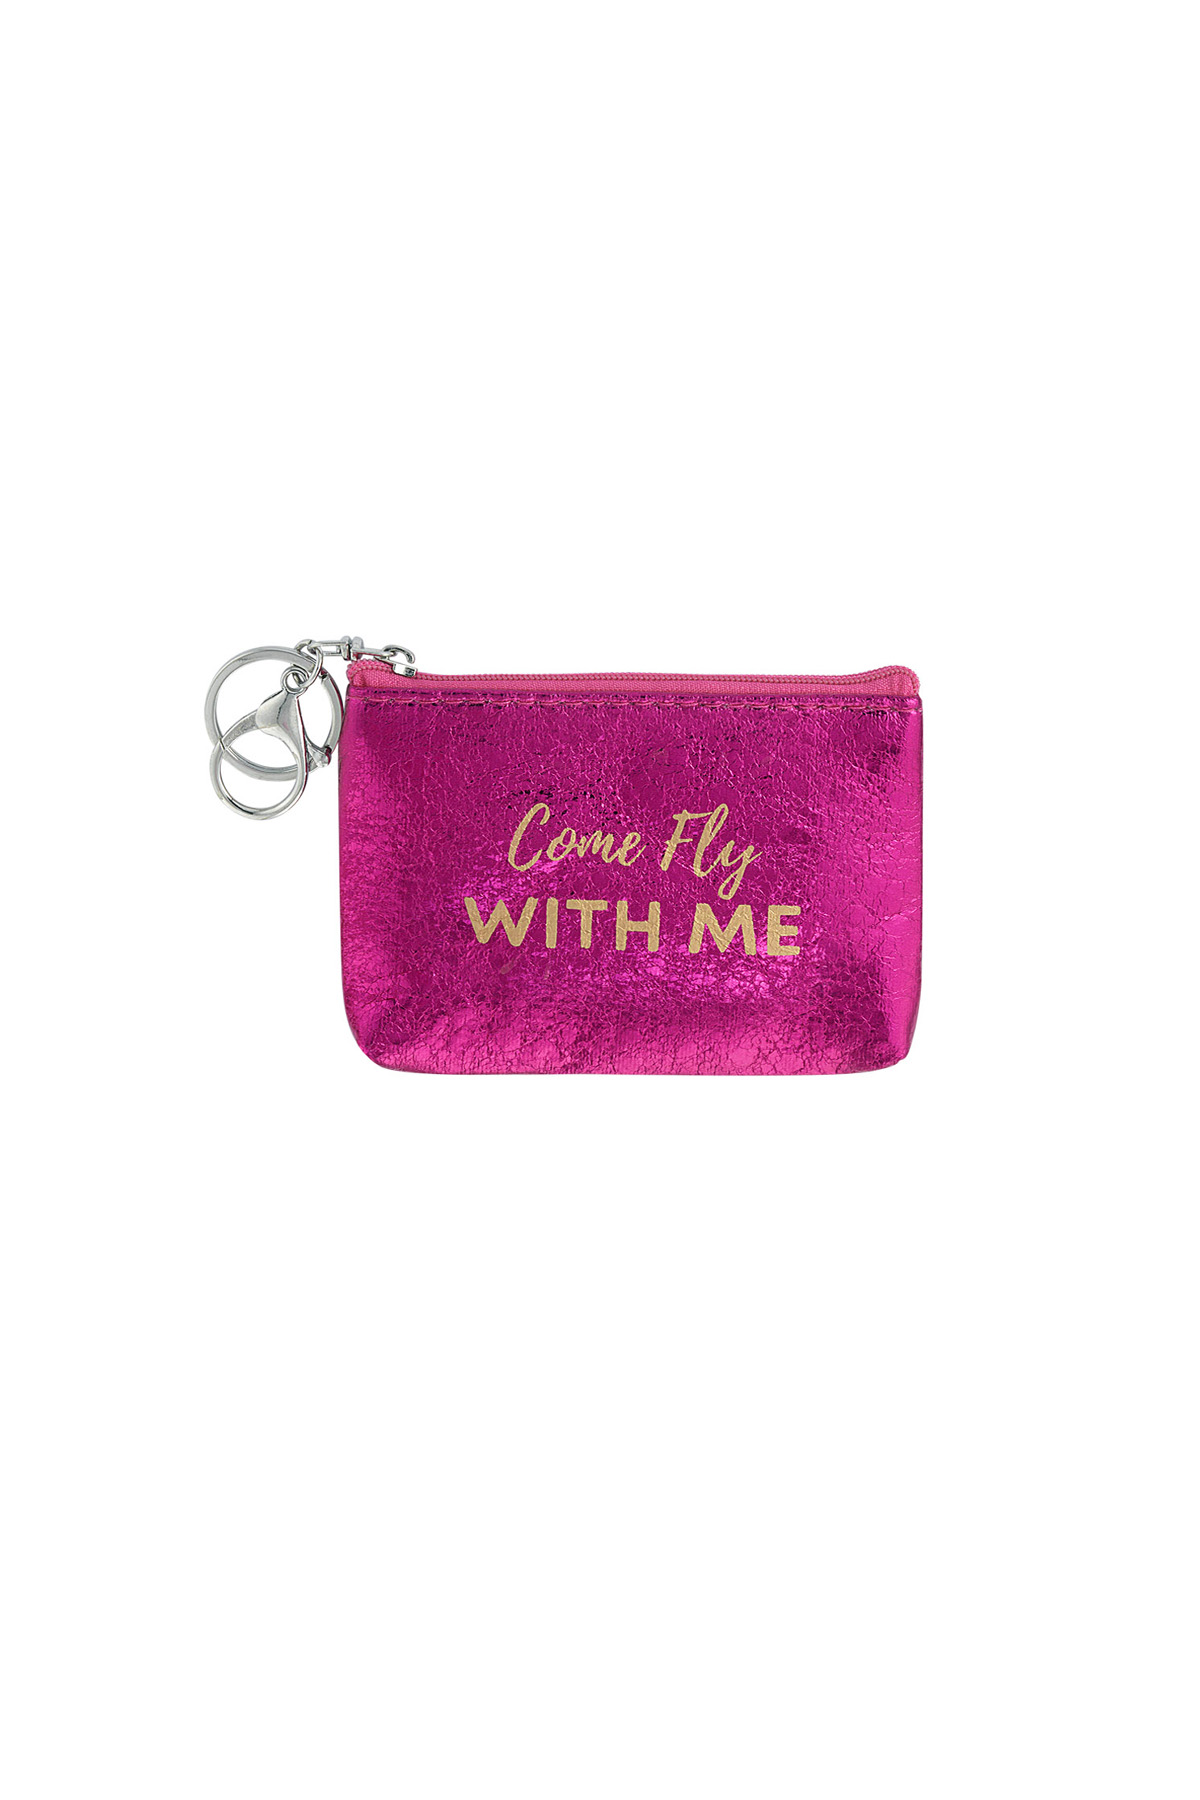 Keychain wallet metallic come fly with me - fuchsia